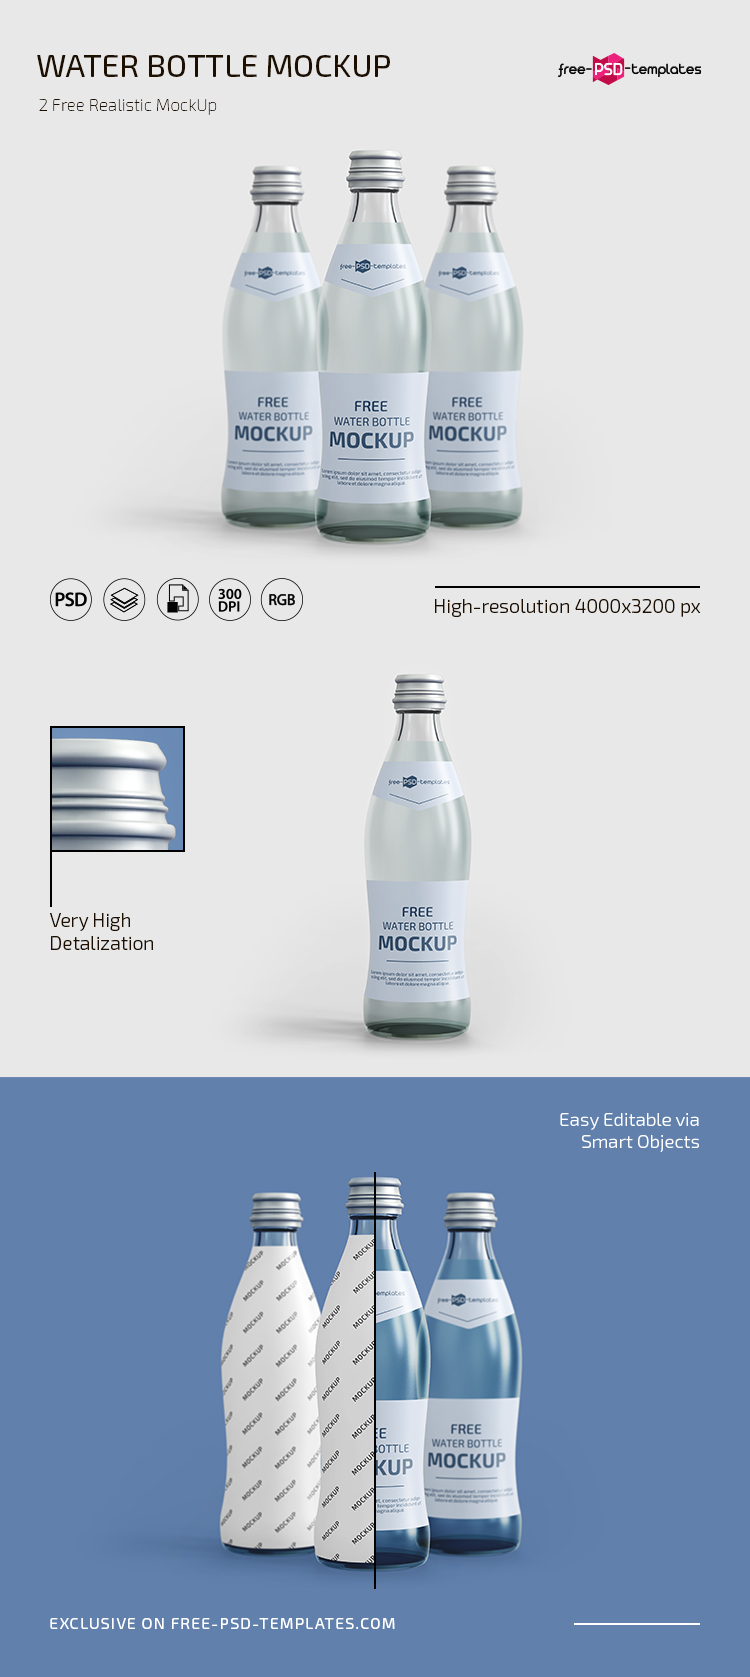 Download Free PSD Water Bottle Mockup Templates | Free PSD Templates